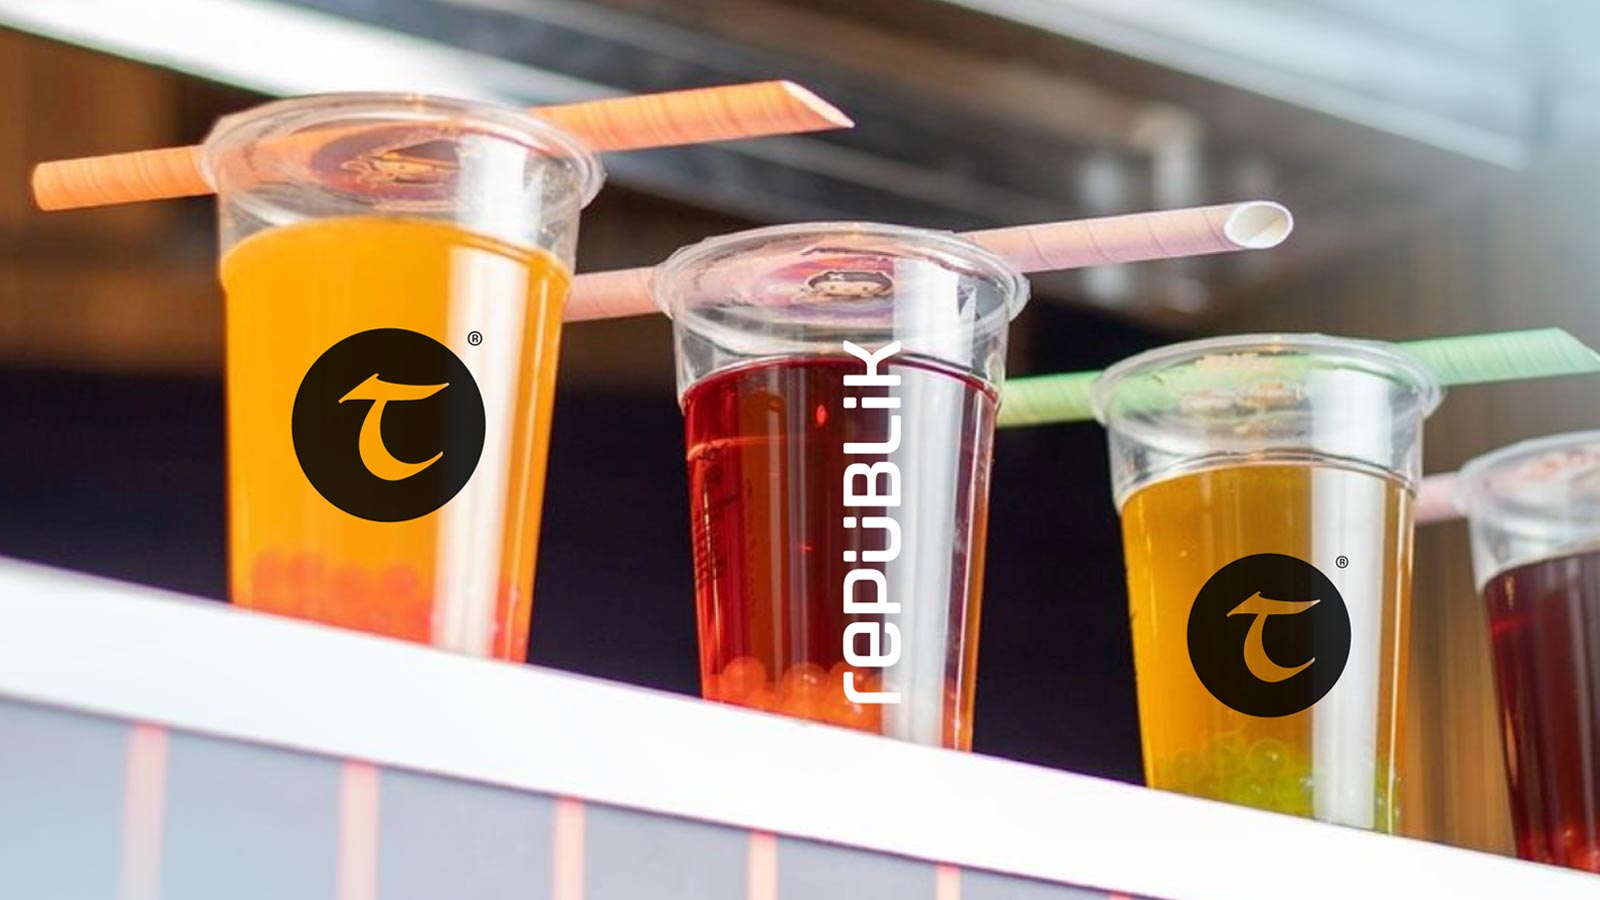 Aimstyle Launches a Bubble Tea Brand in Turkey